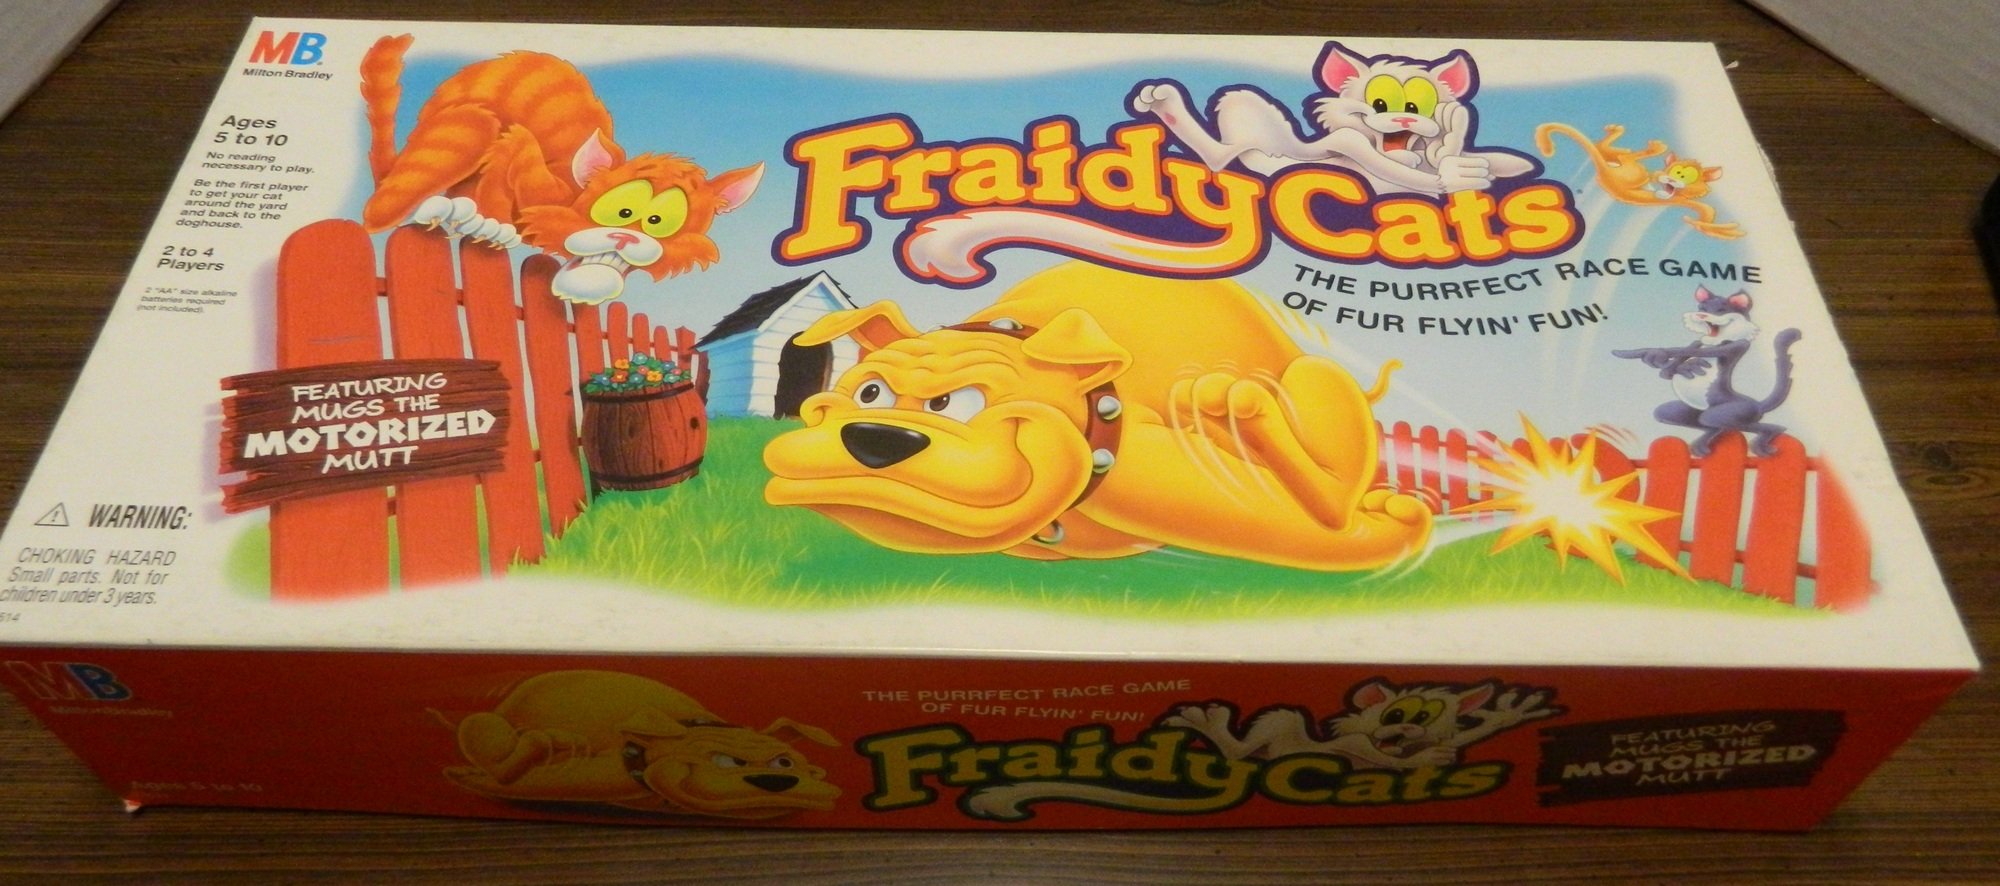 Fraidy Cats Board Game Review and Rules